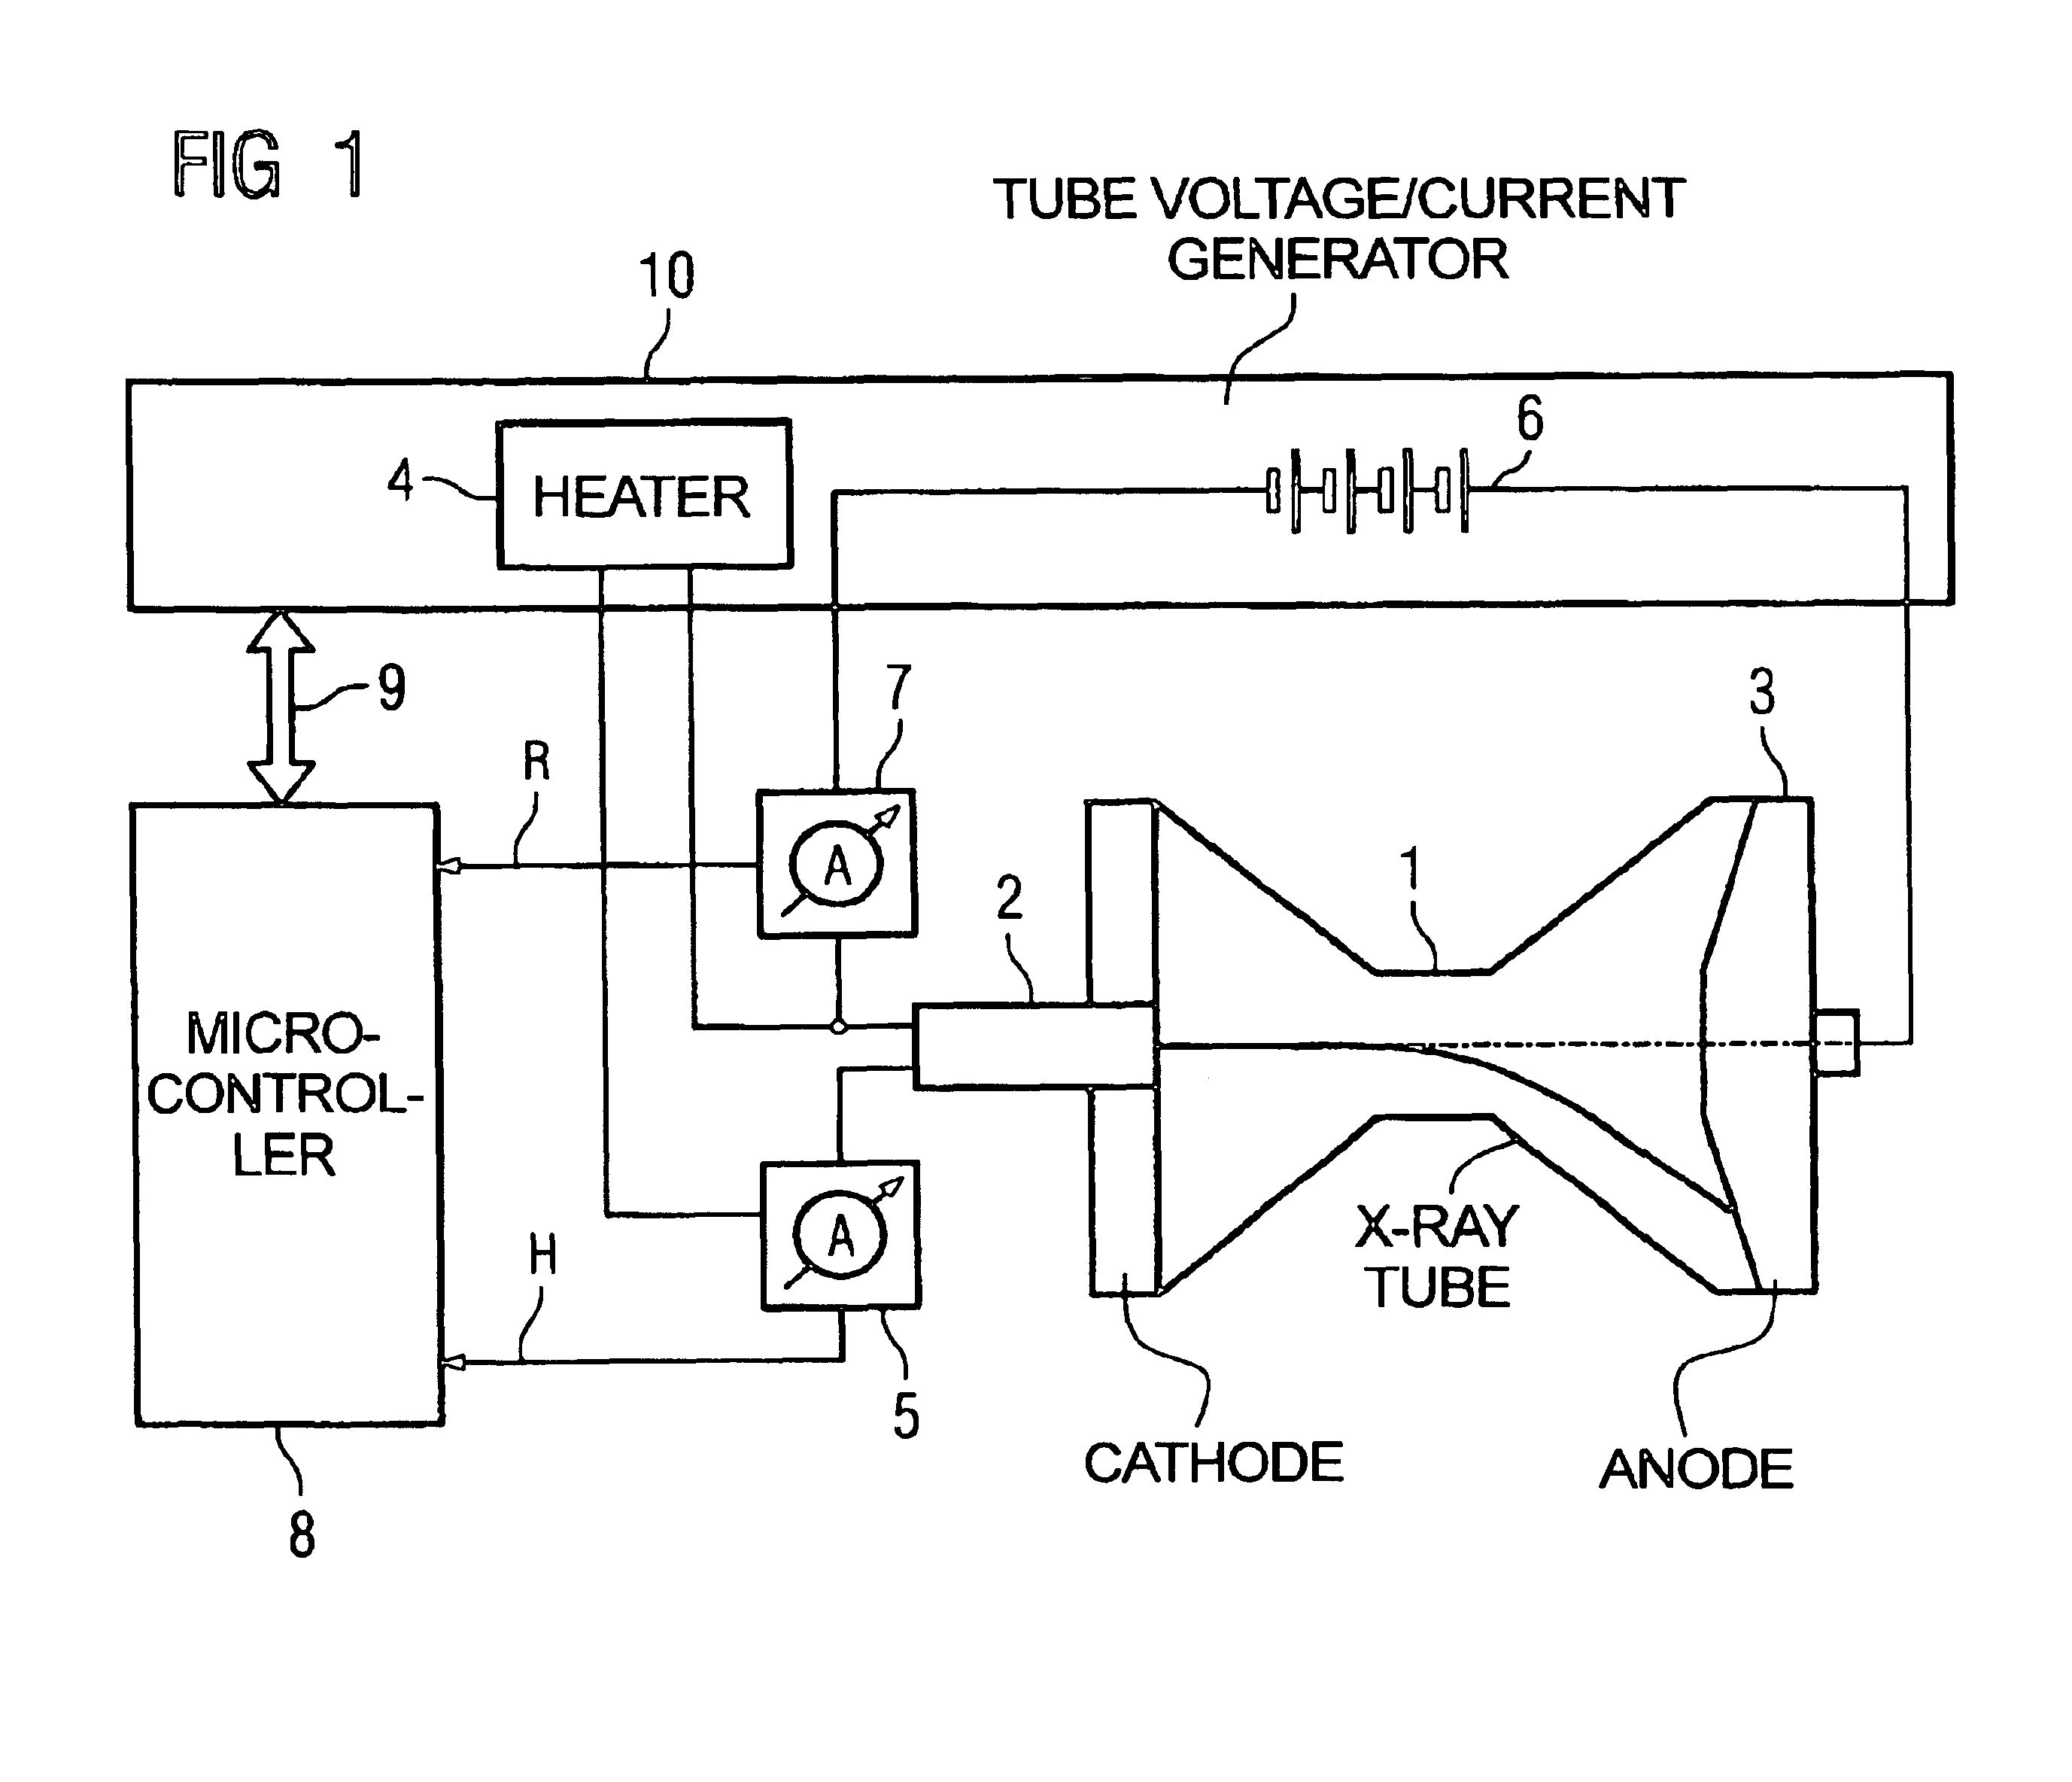 Device to detect pressure in an x-ray tube